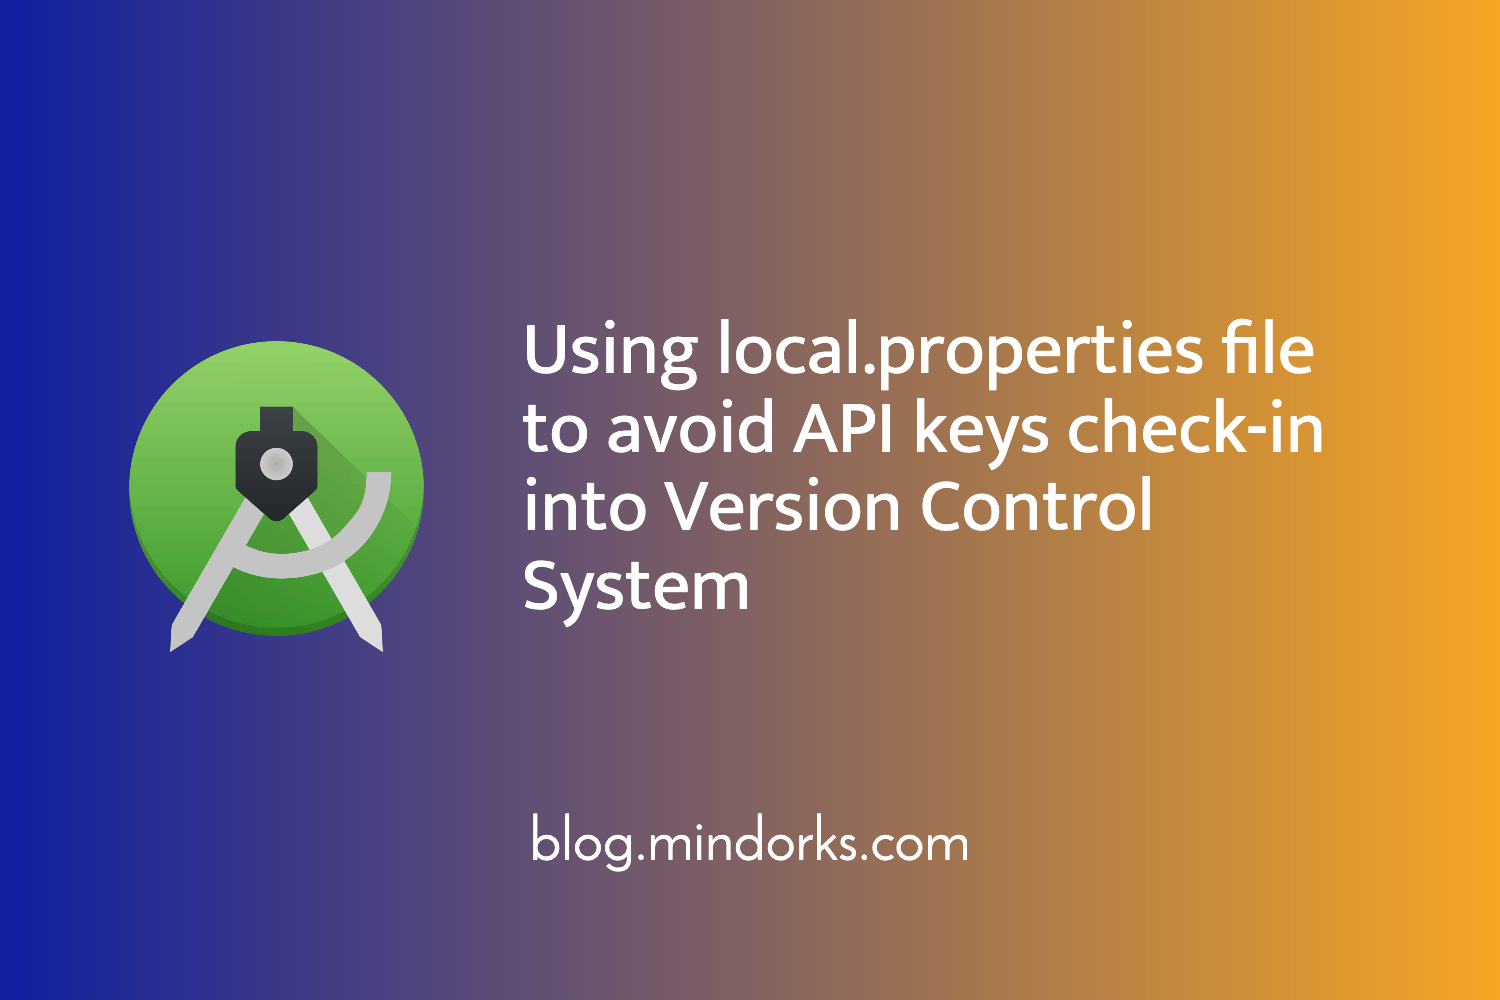 Using local.properties file to avoid API Keys check-in into Version Control System